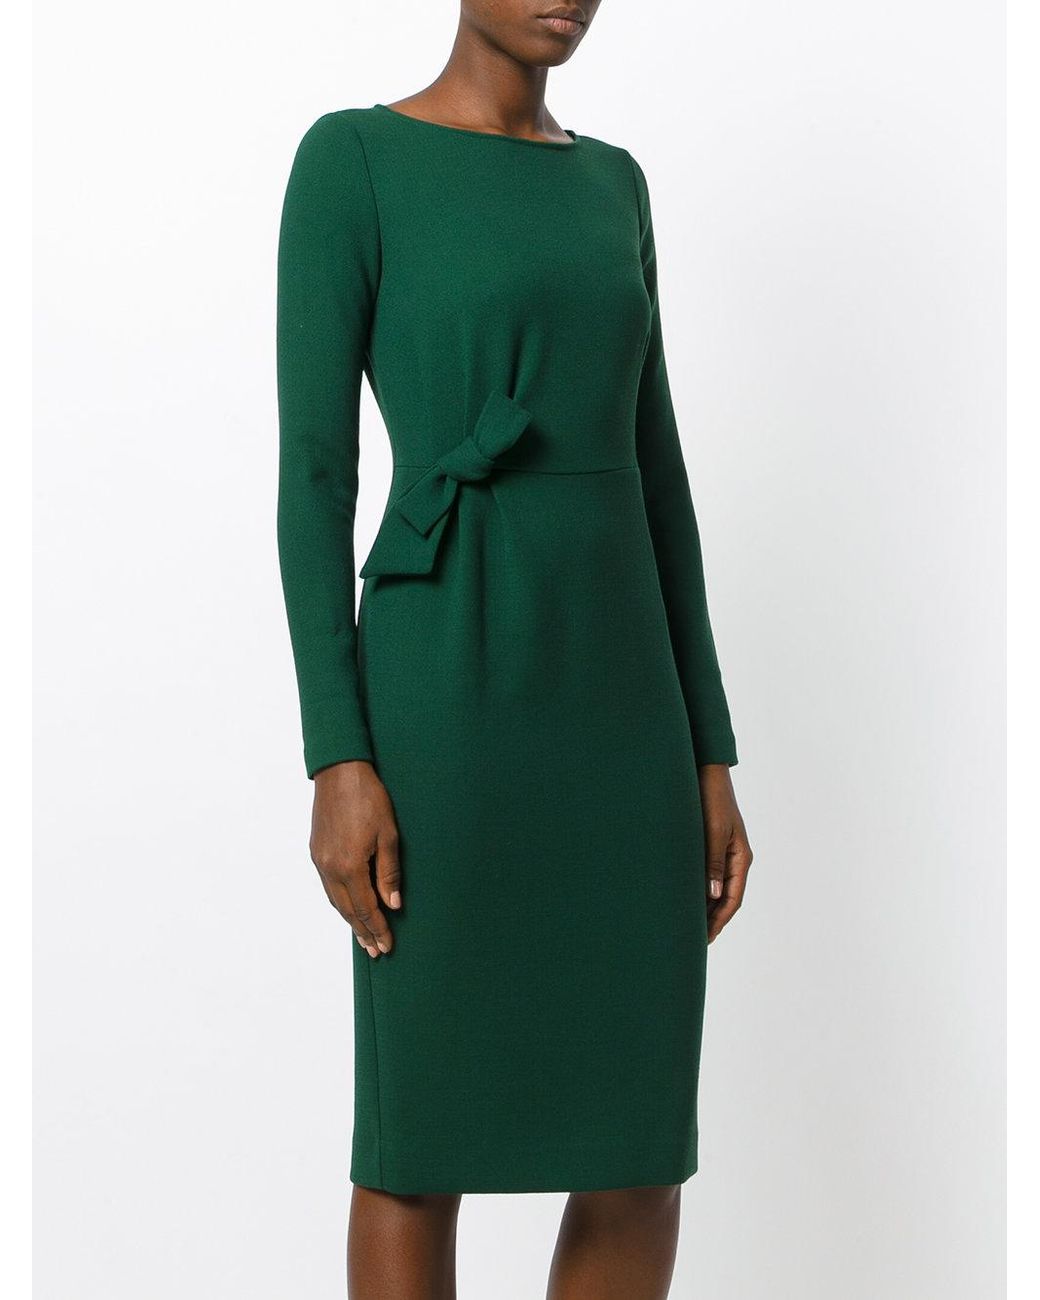 P.A.R.O.S.H. Bow Detail Dress in Green | Lyst